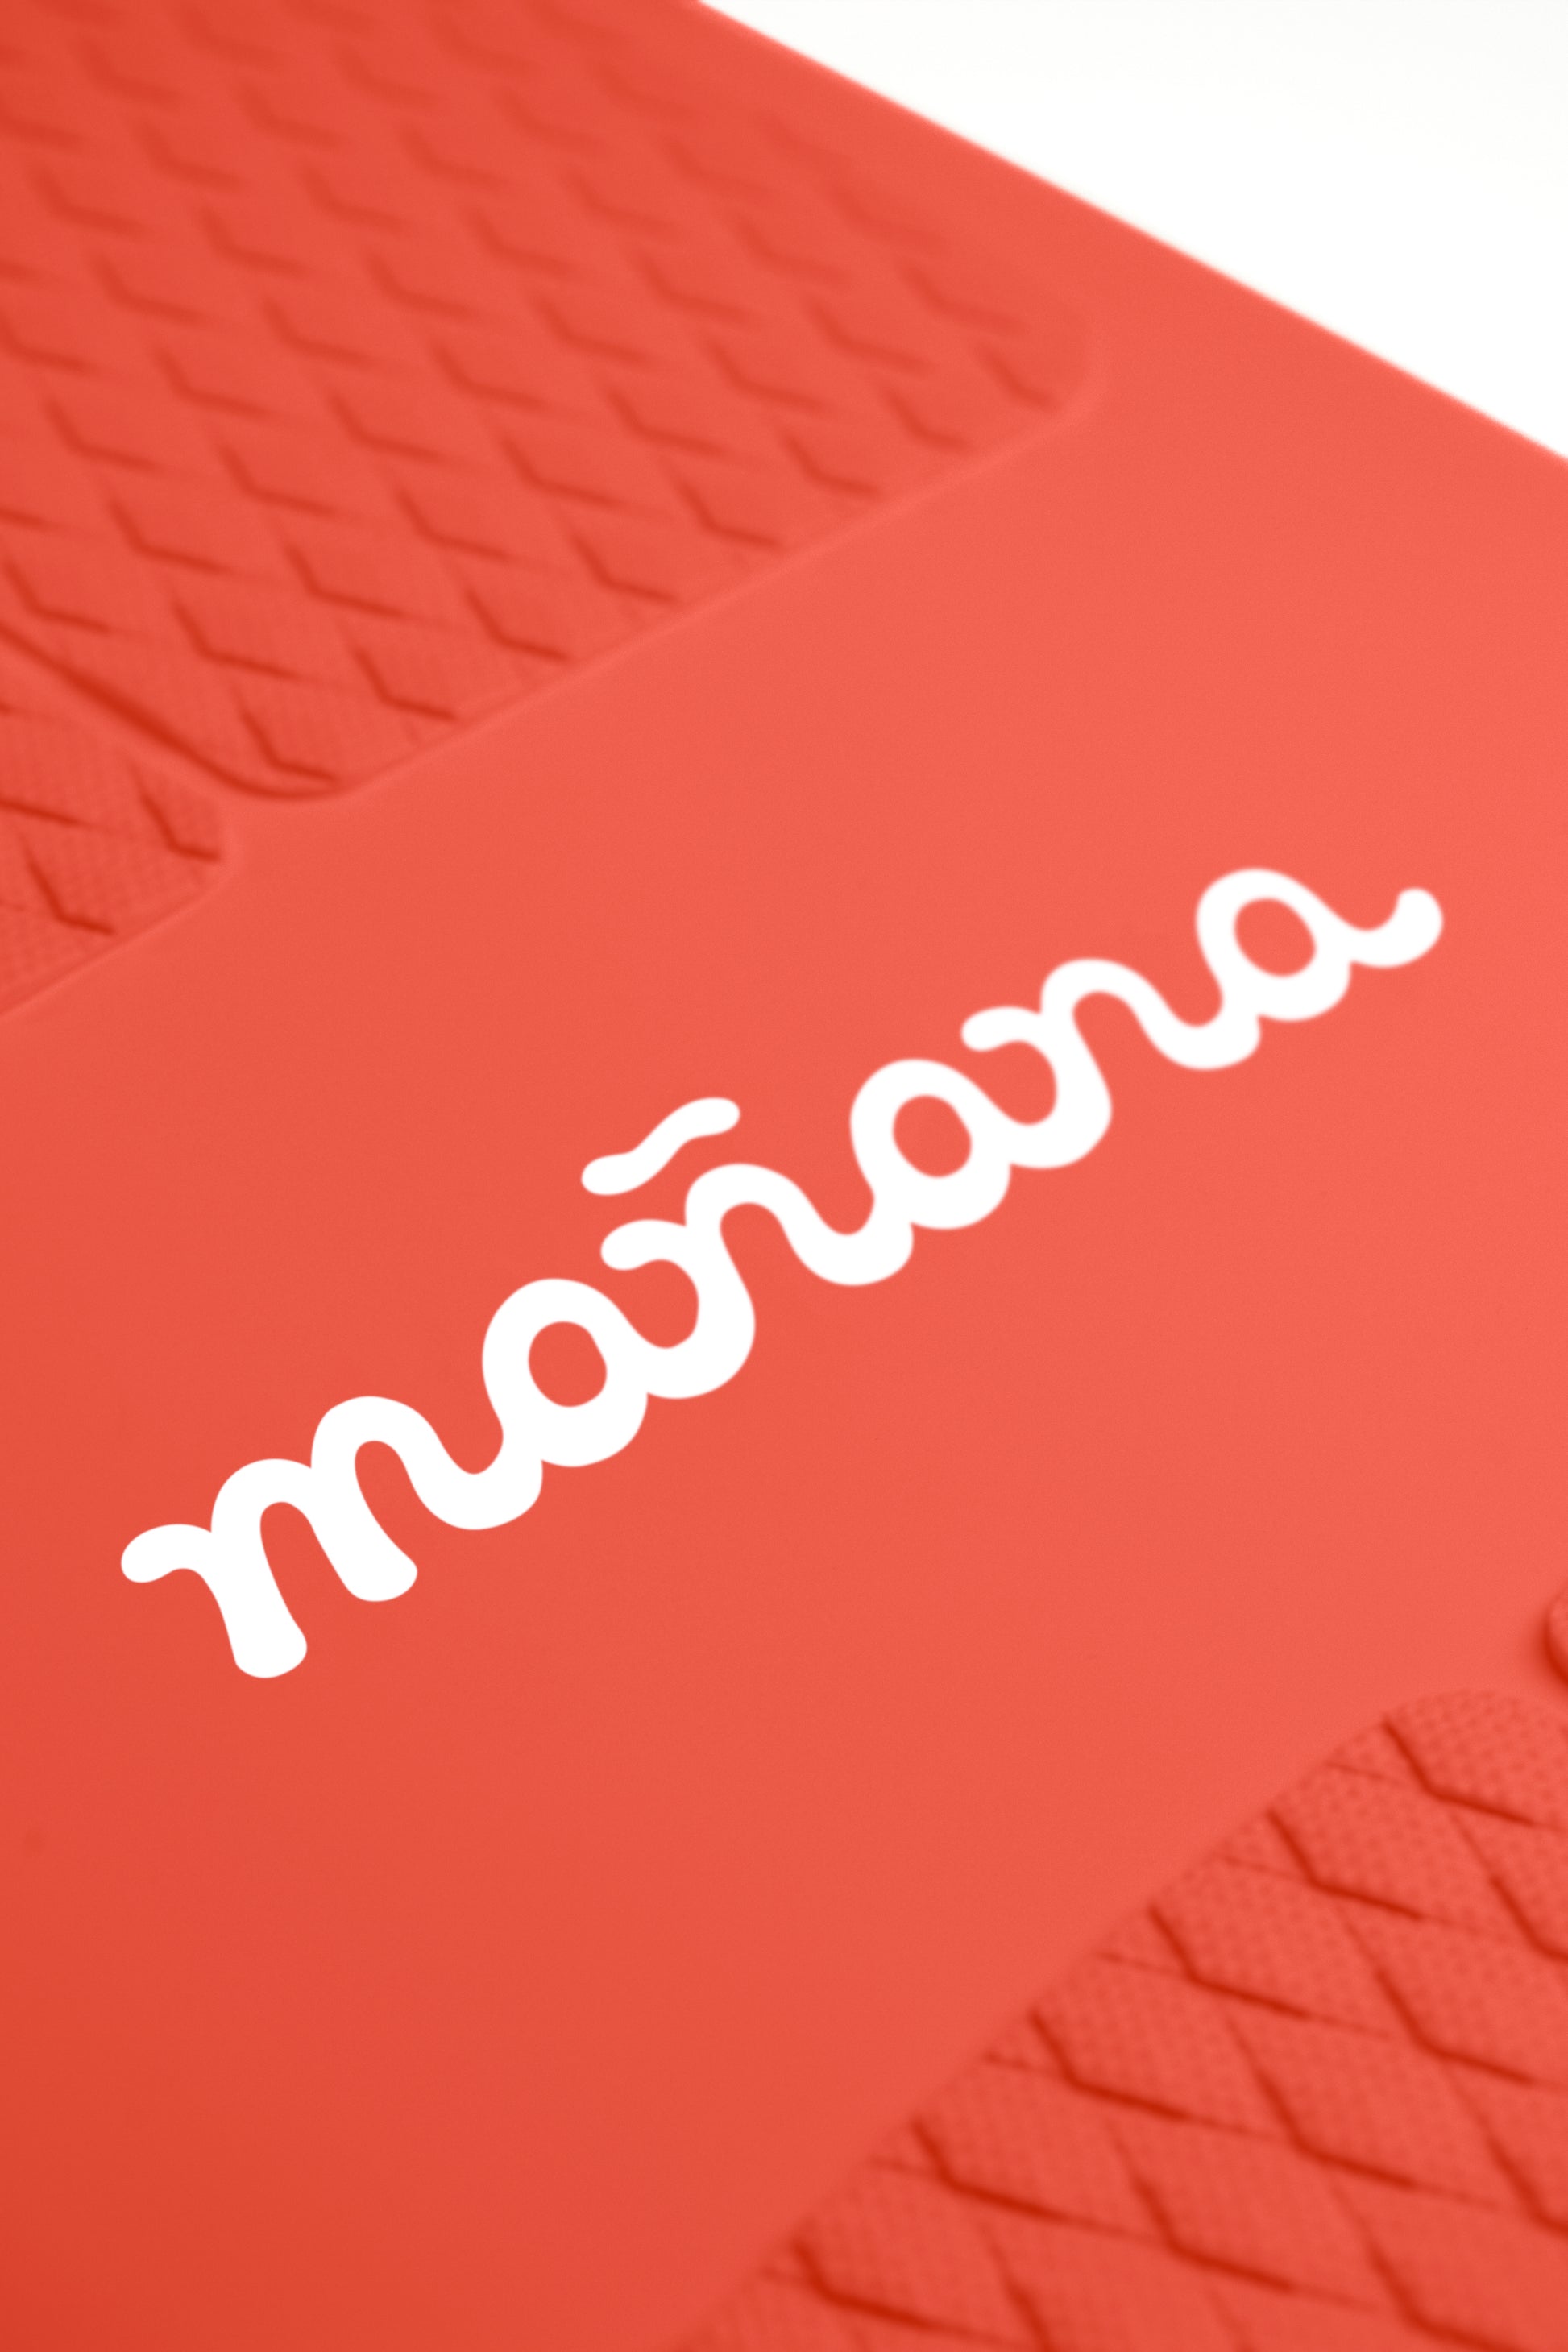 Red Terry Surfboard with Manana branding